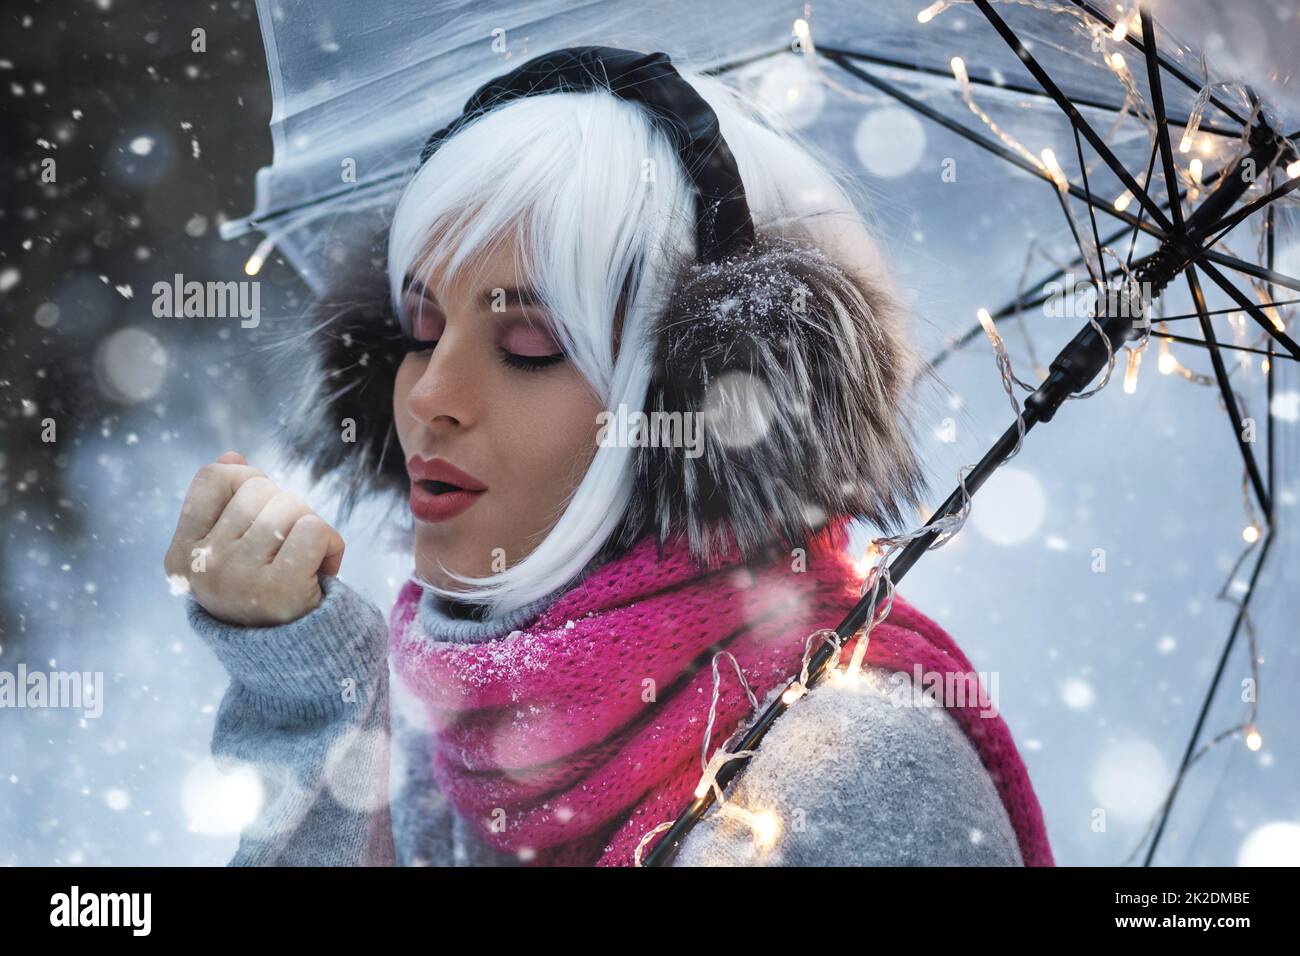 Young woman walking under transparent umbrella at snowy winter day Stock Photo